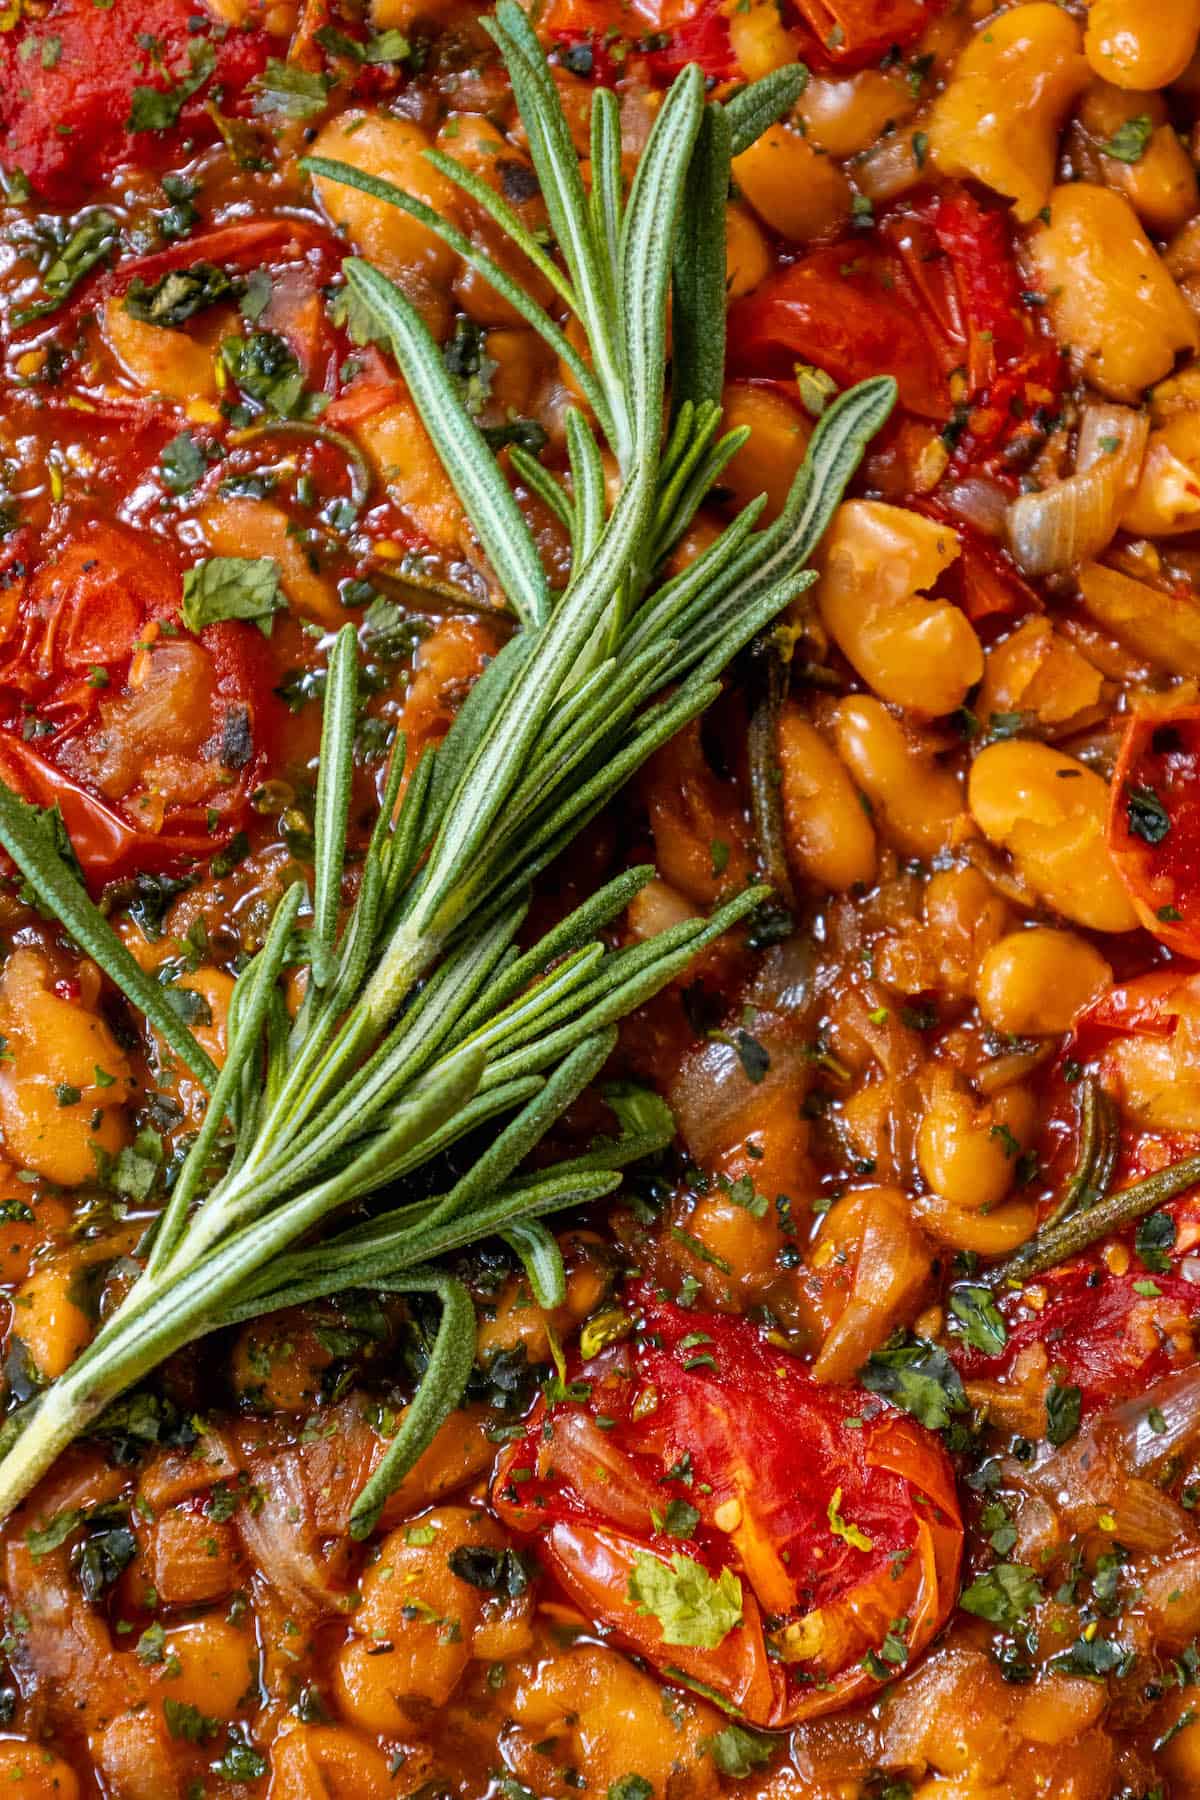 A dish of beans and tomatoes with a rosemary sprig, infused with important SEO keywords.